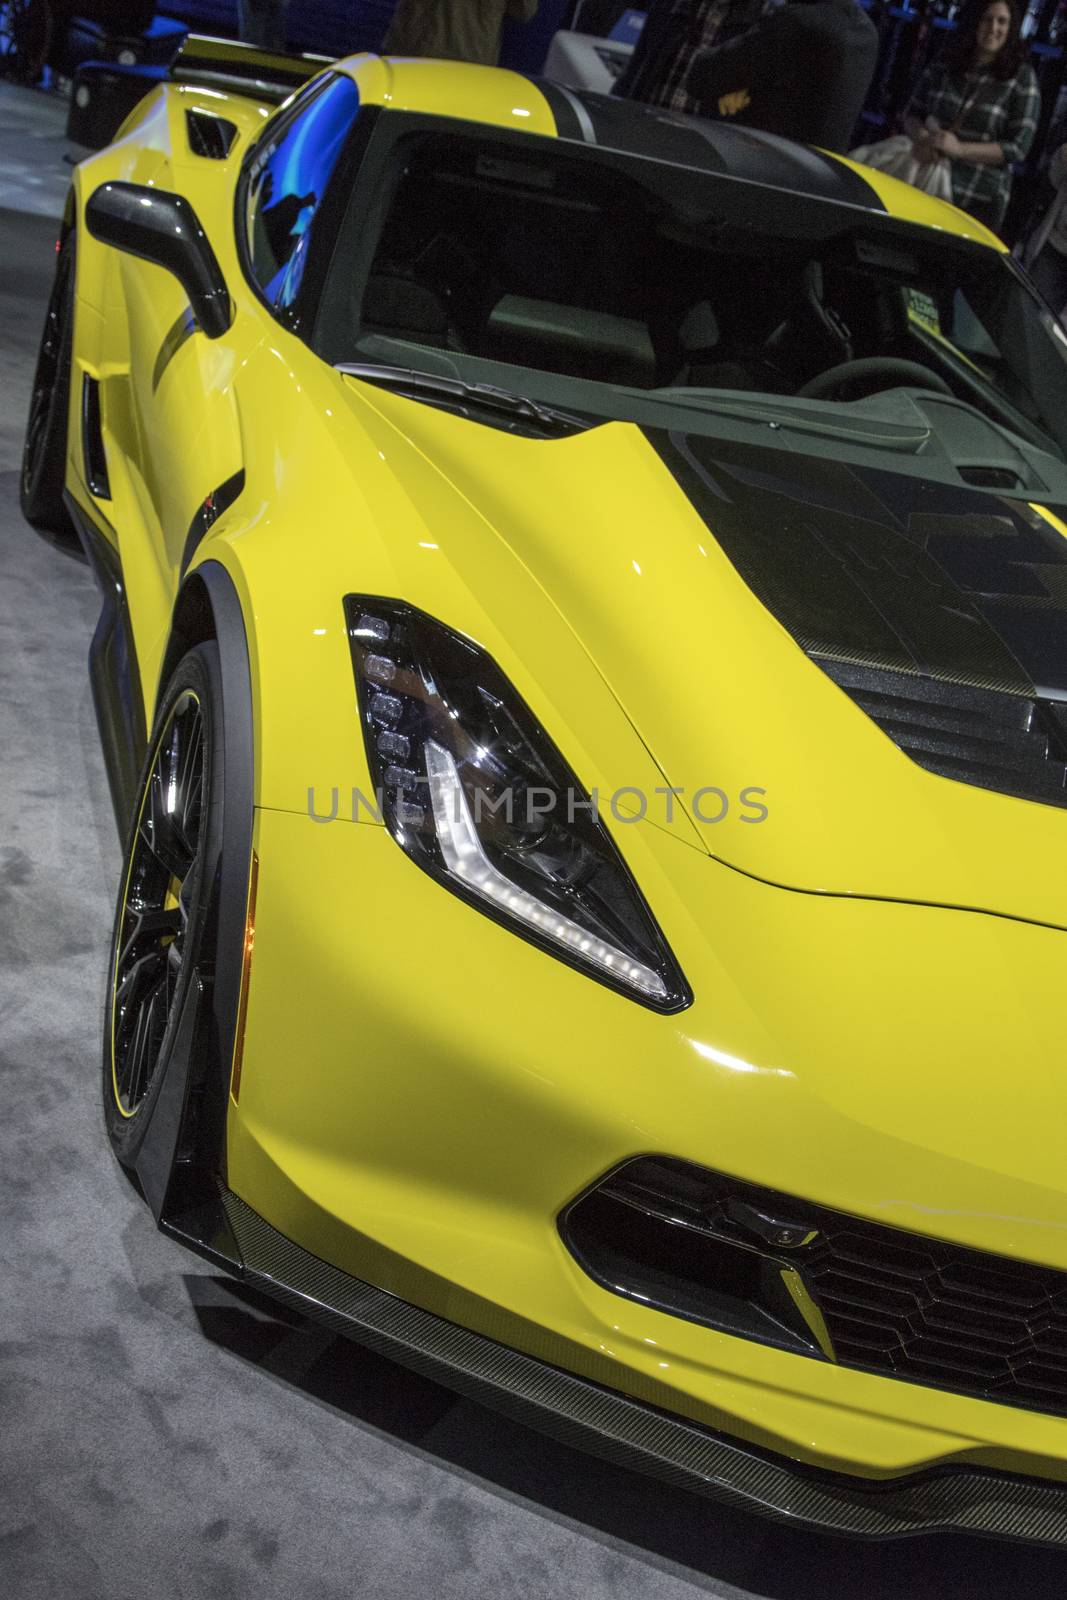 DETROIT - JANUARY 17 :The 2017 Chevrolet Corvette at The North American International Auto Show January 17, 2016 in Detroit, Michigan.